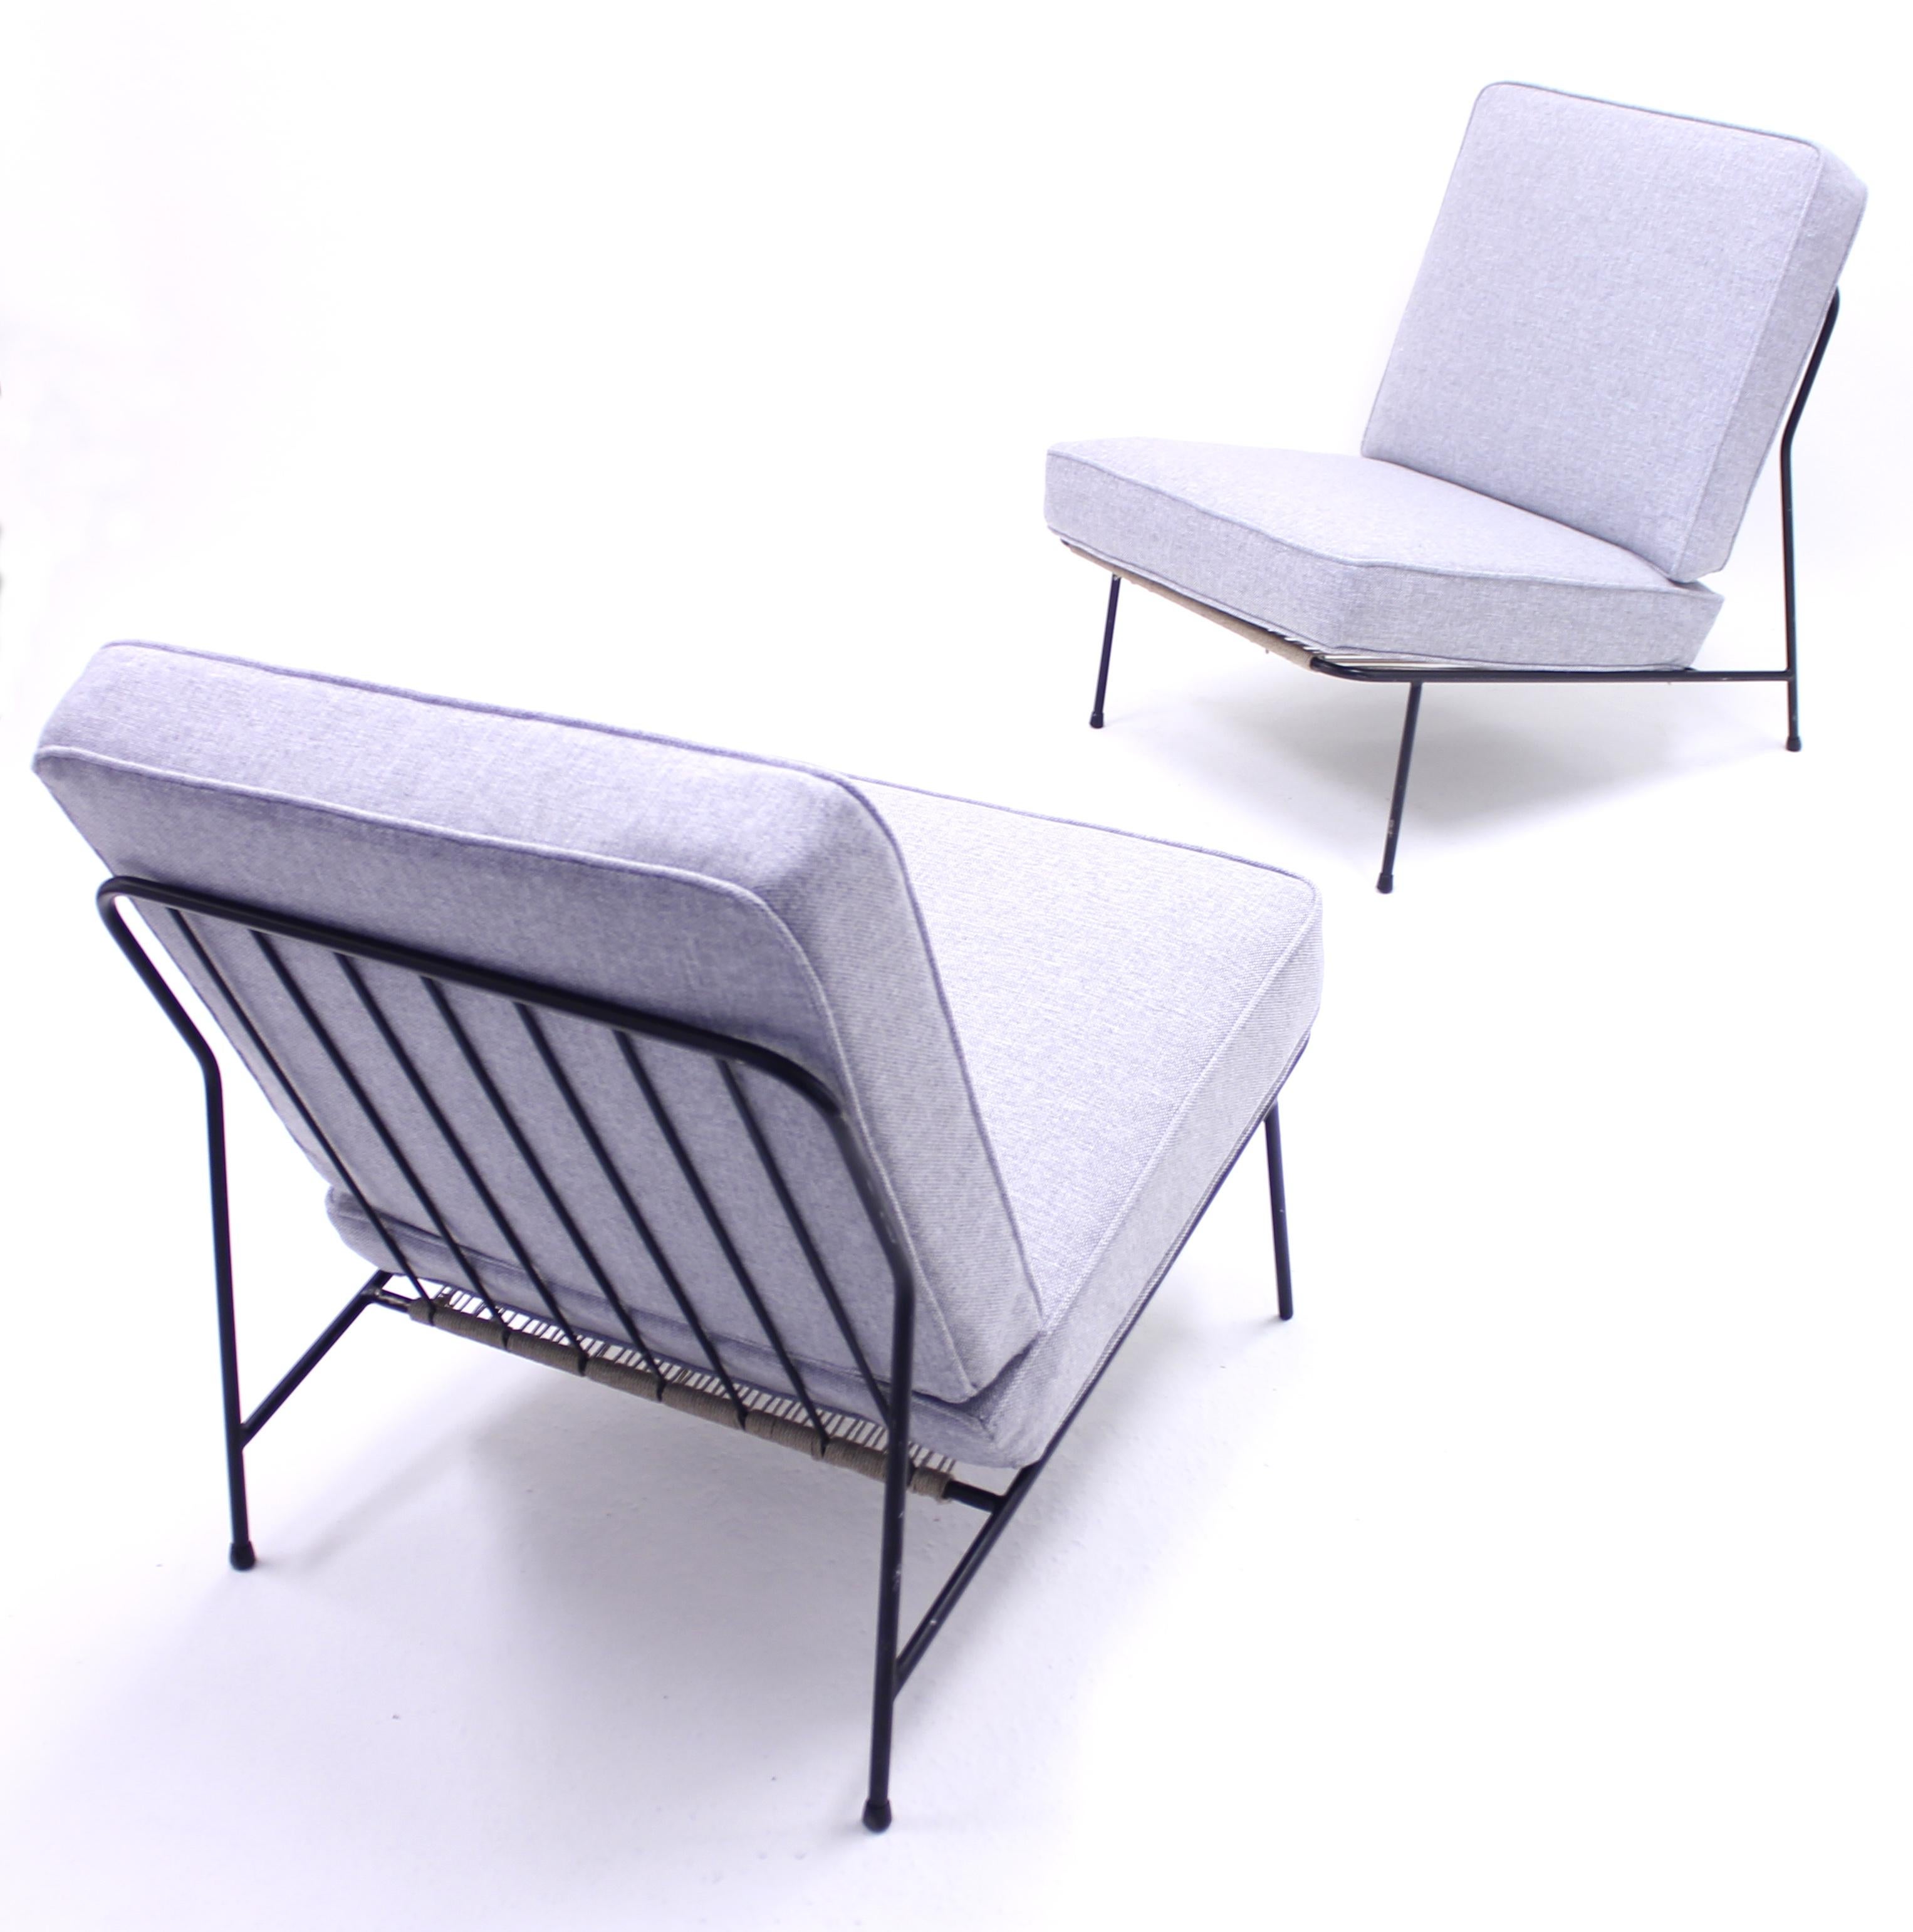 Alf Svensson, Pair of Domus Lounge Chairs, DUX, 1950s For Sale 3